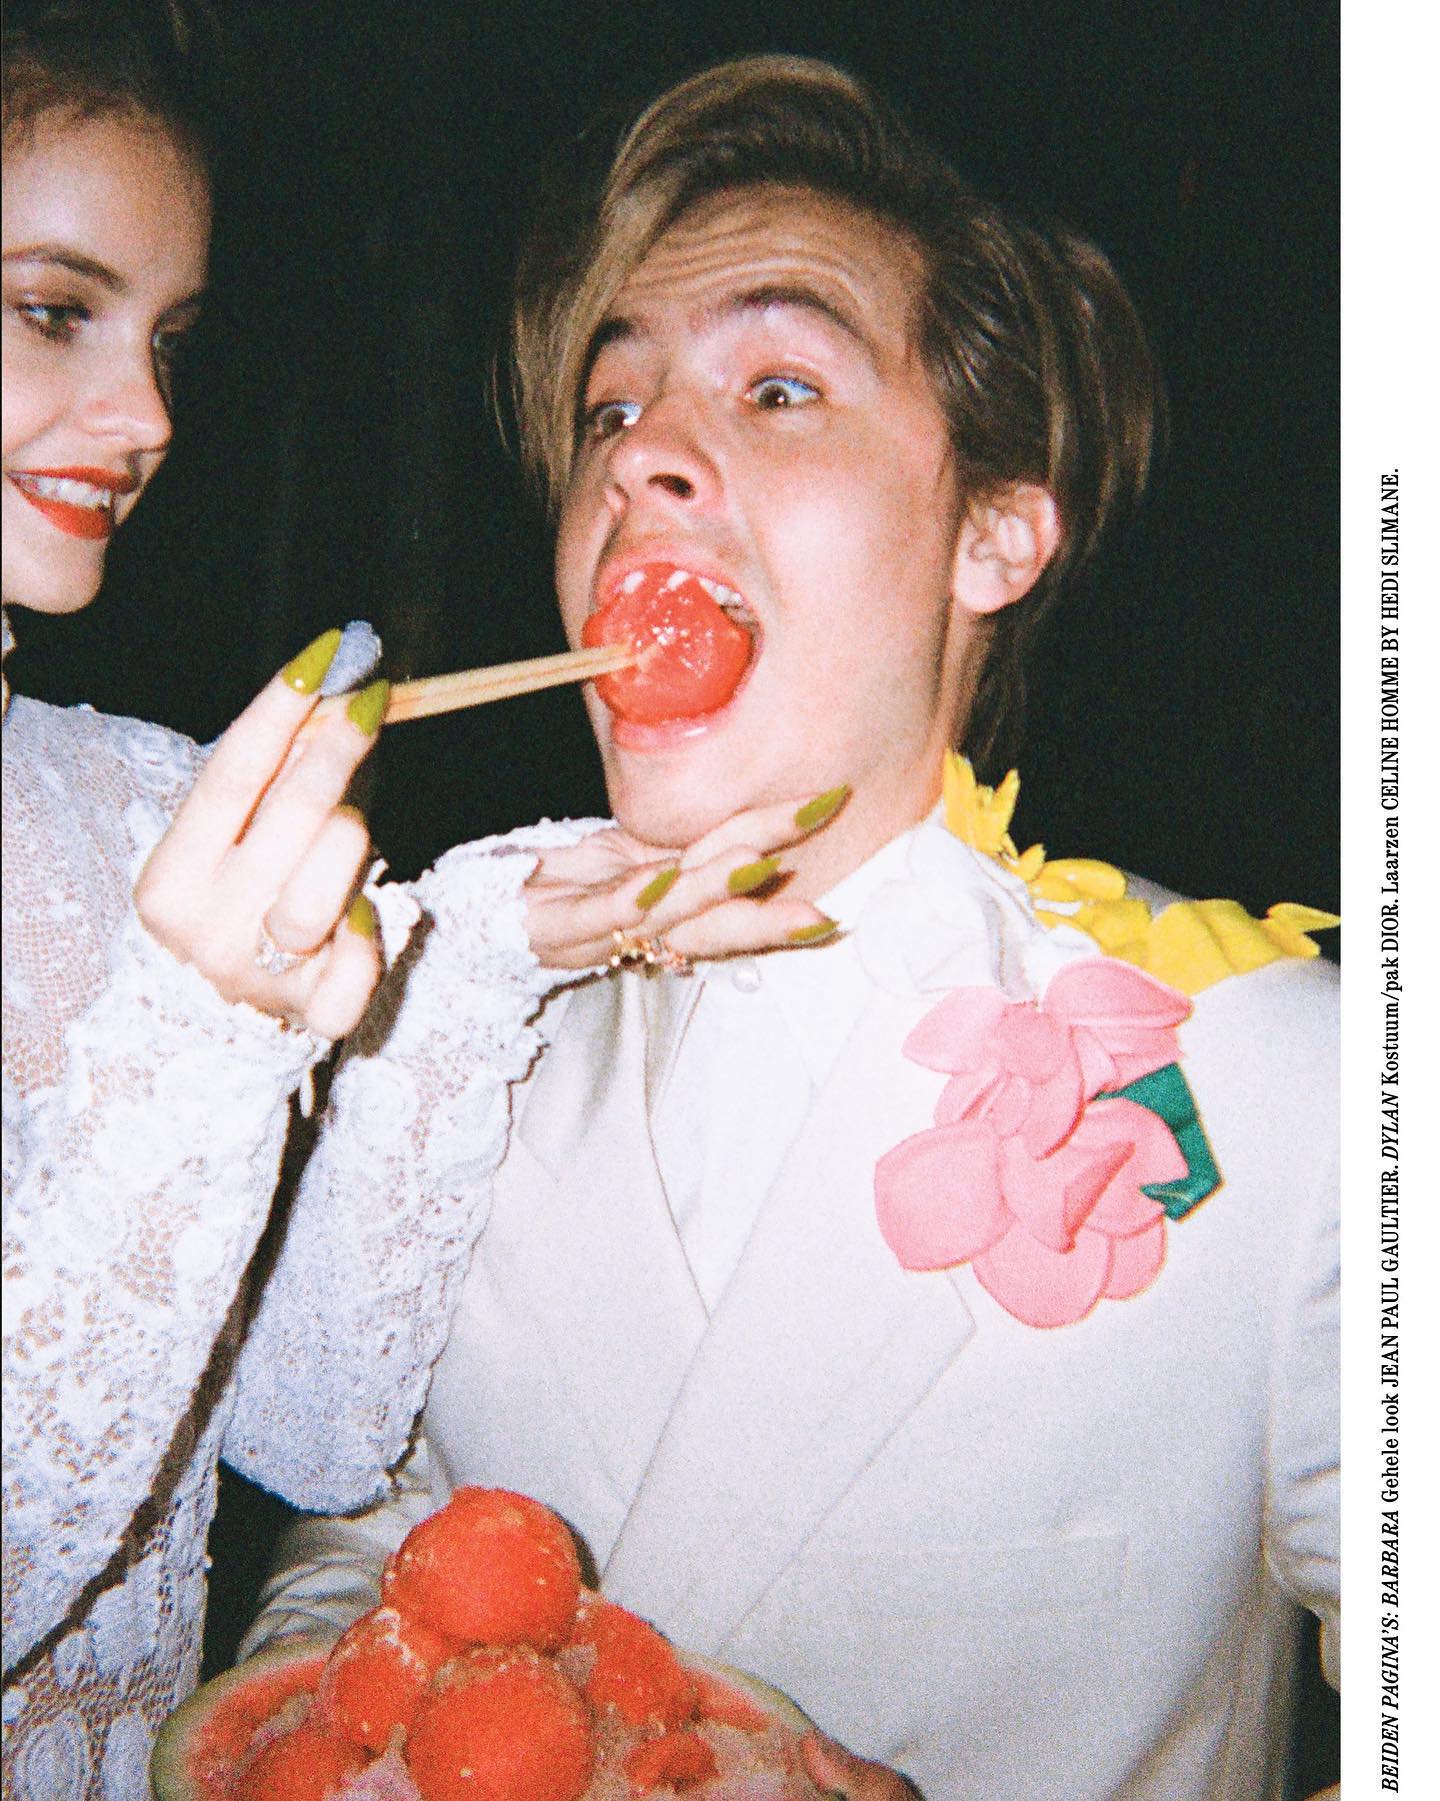 Barbara Palvin and Dylan Sprouse Hit the Cover! - Photo 5